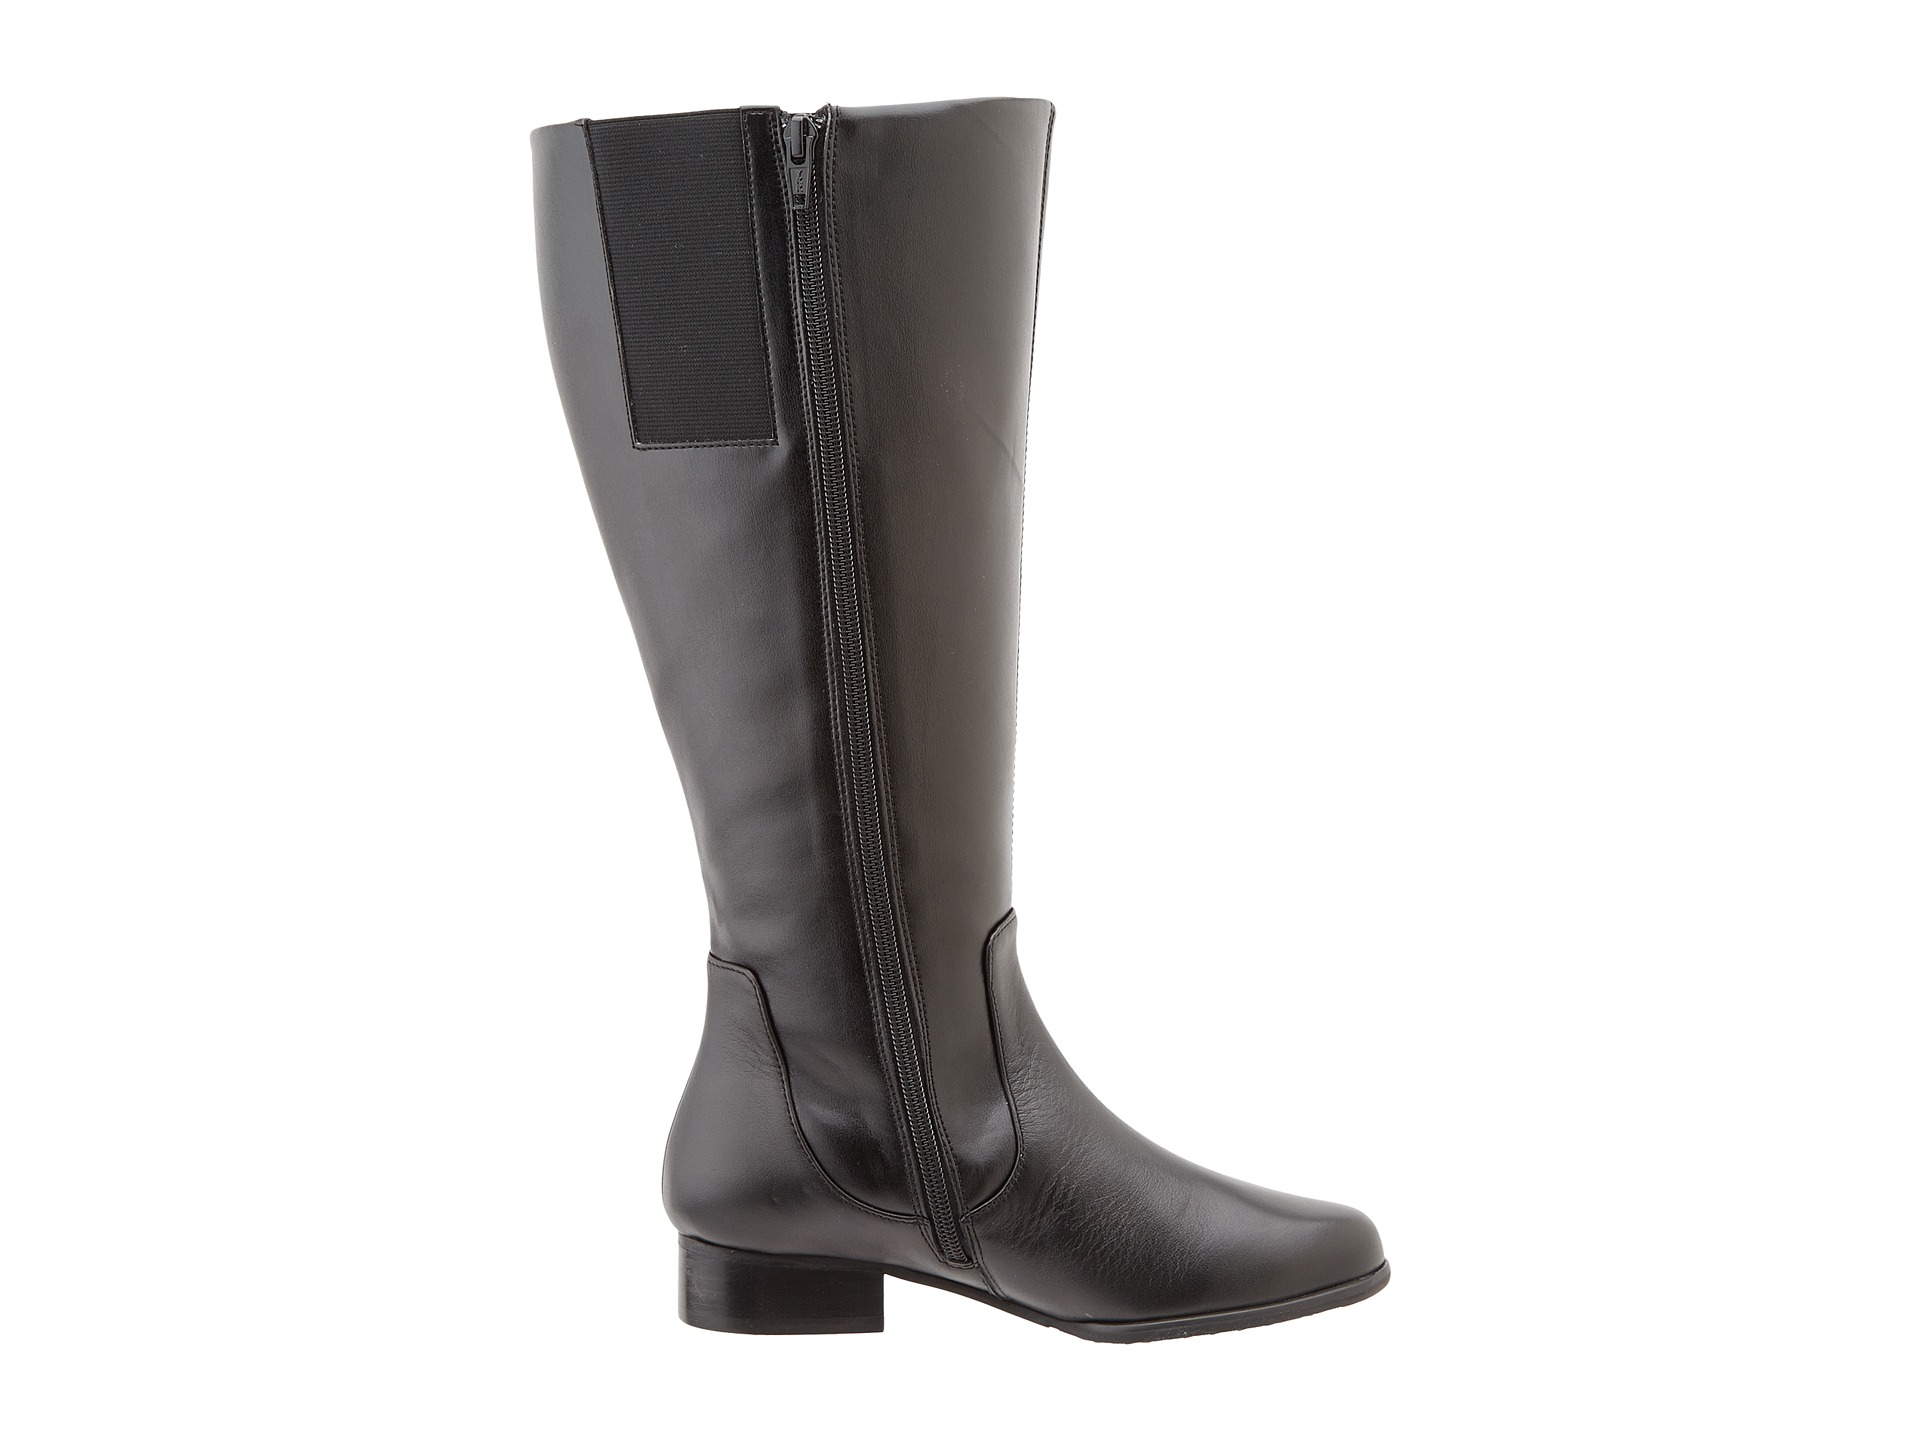 Fitzwell Temecula Extra Wide Calf Boot | Shipped Free at Zappos